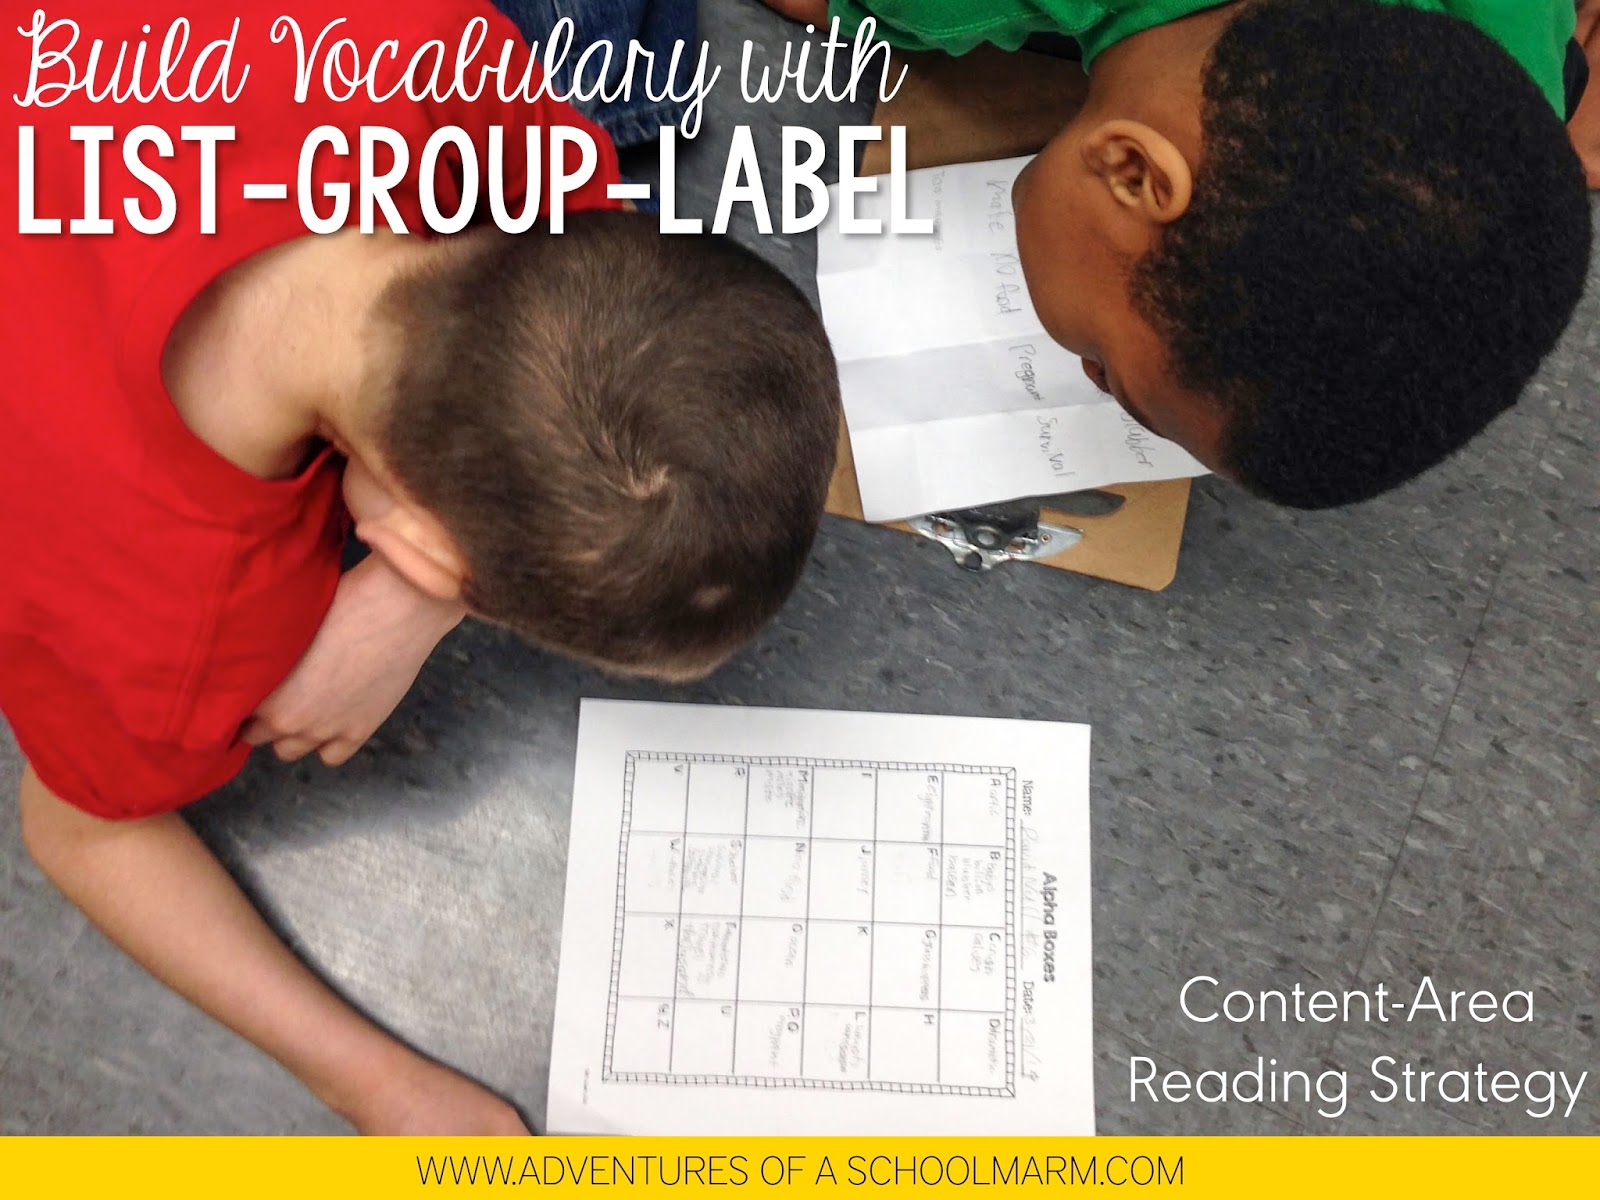 List-Group-Label is another one of my favorite strategies for increasing students' vocabulary. Grouping and labeling the words activates their critical thinking skills and helps them see relationships between the words. By connecting their prior knowledge to new learning, they are able to form a lasting understanding of what the words mean. Great for activating critical thinking skills, connecting prior knowledge to new learning, and encouraging divergent thinking! 